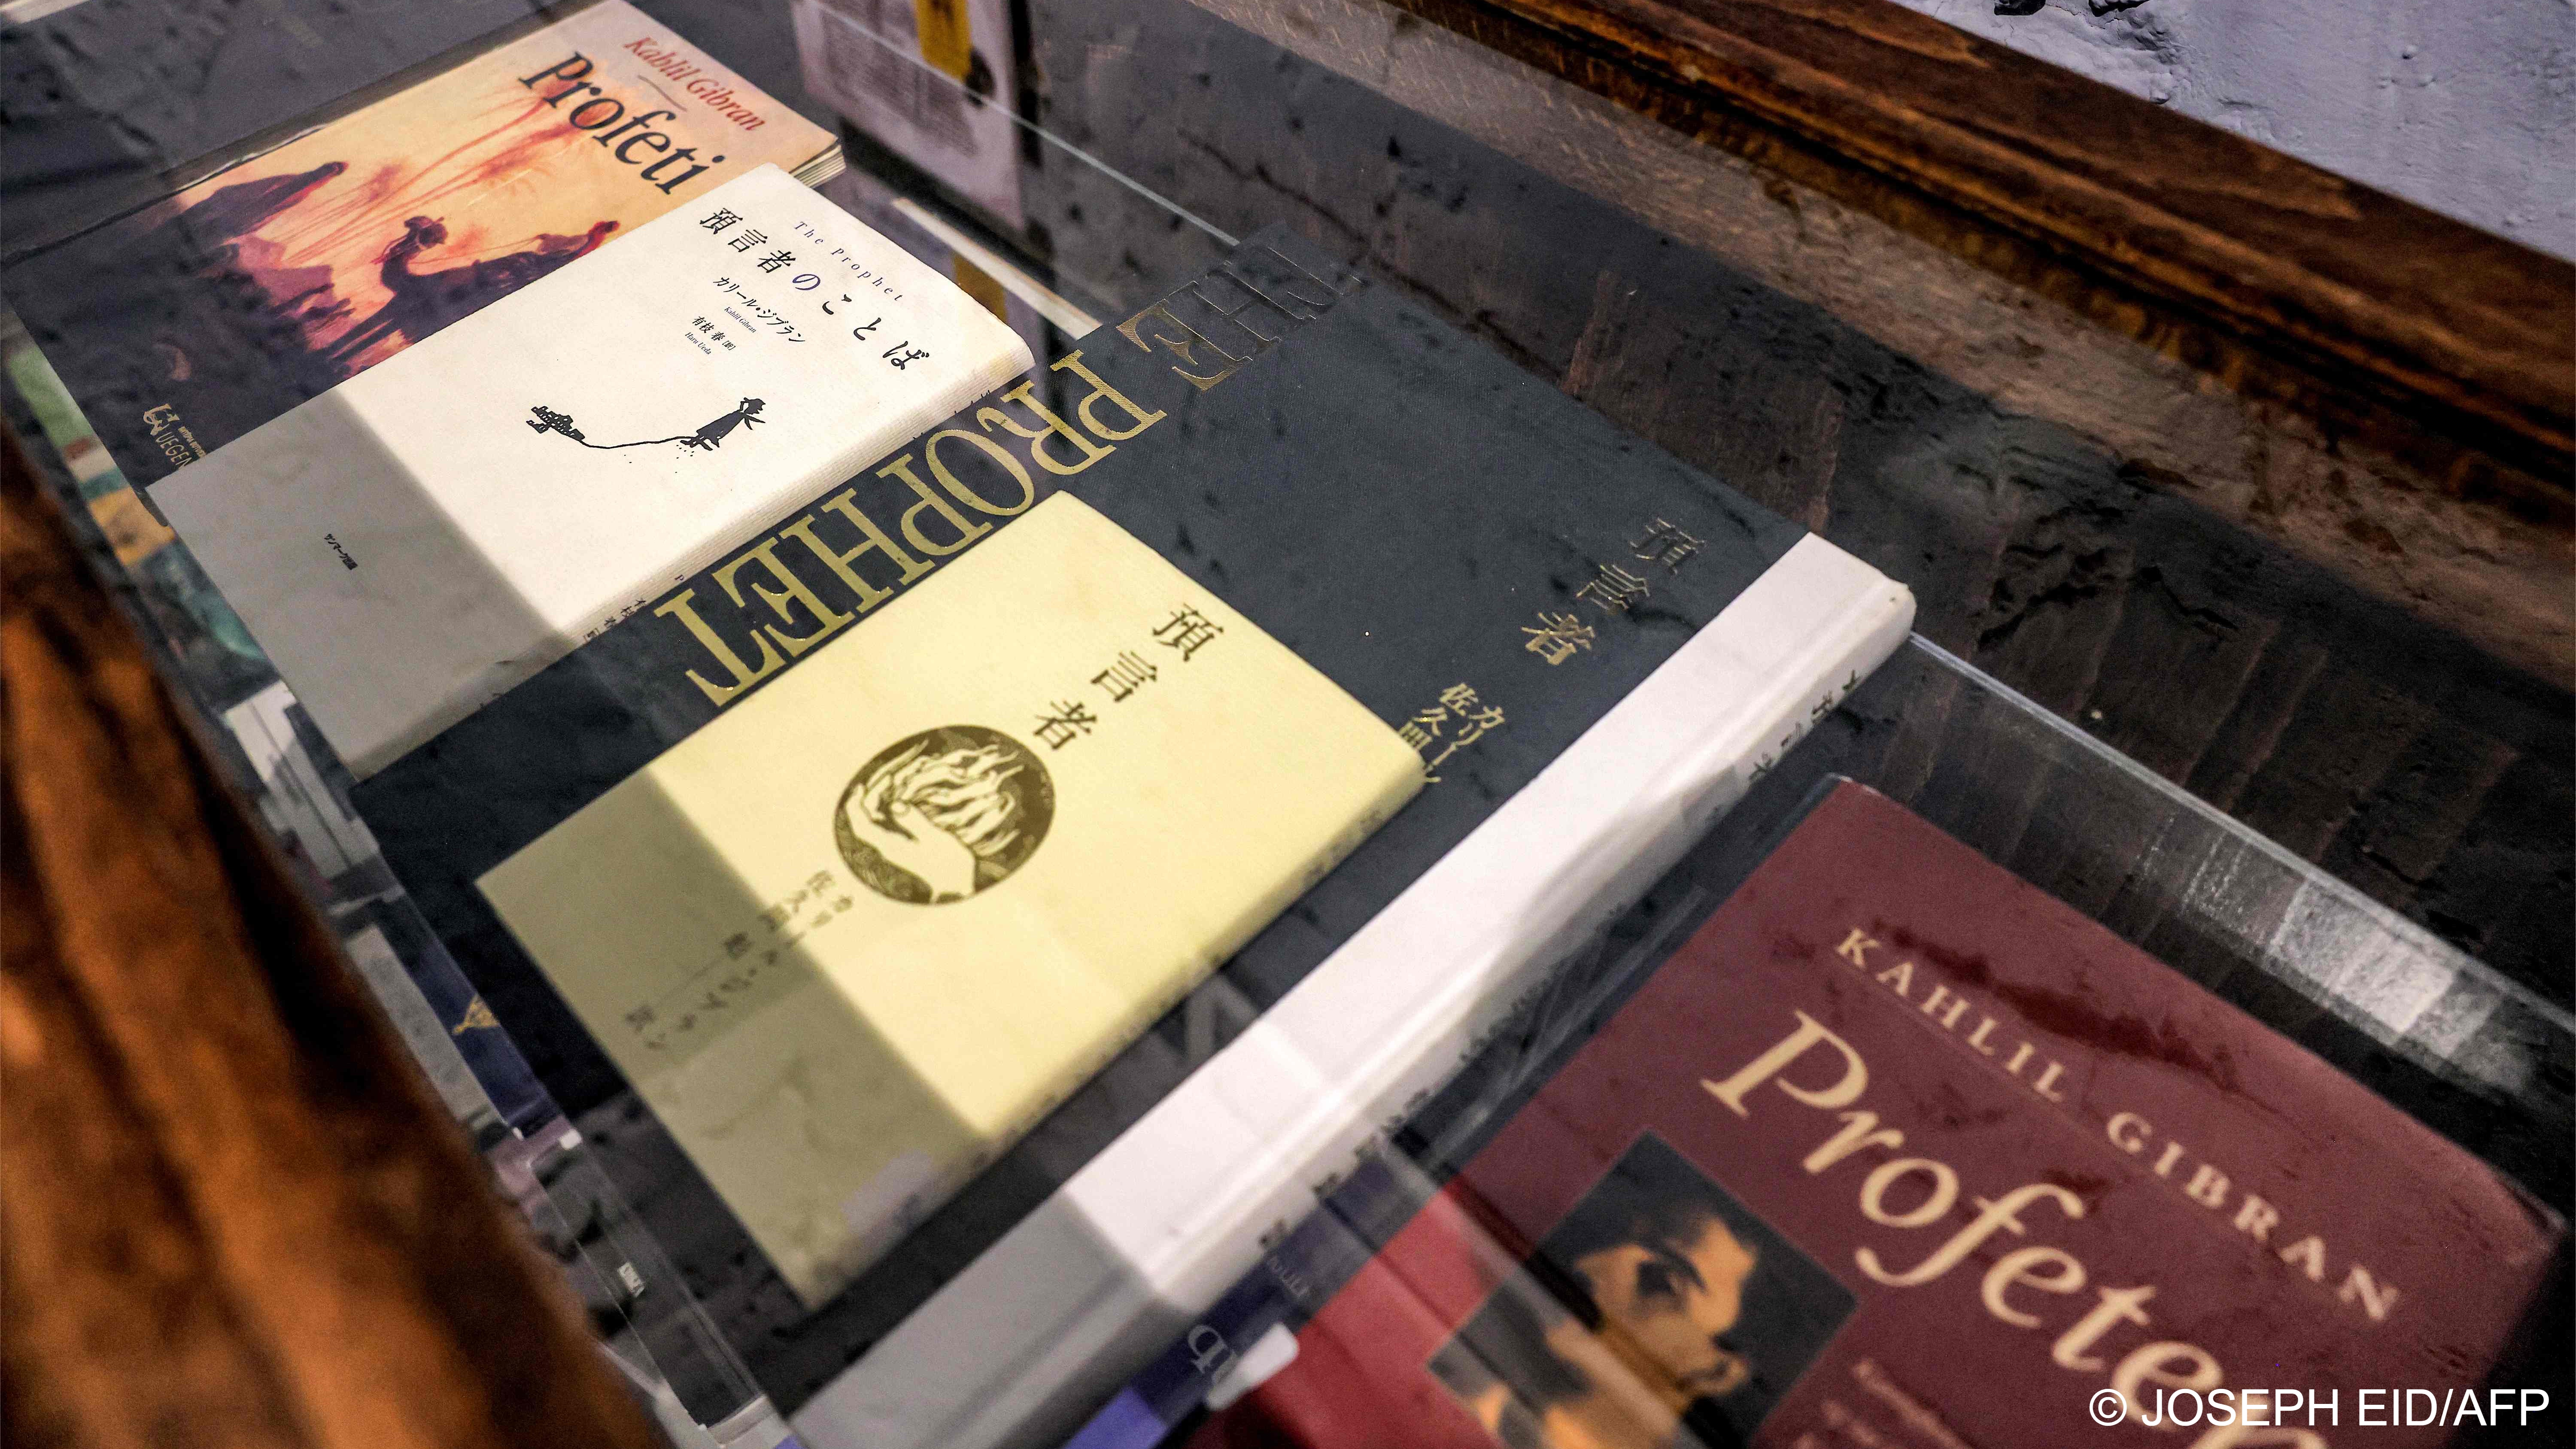 Copies of Khalil Gibran's "The Prophet" in many languages